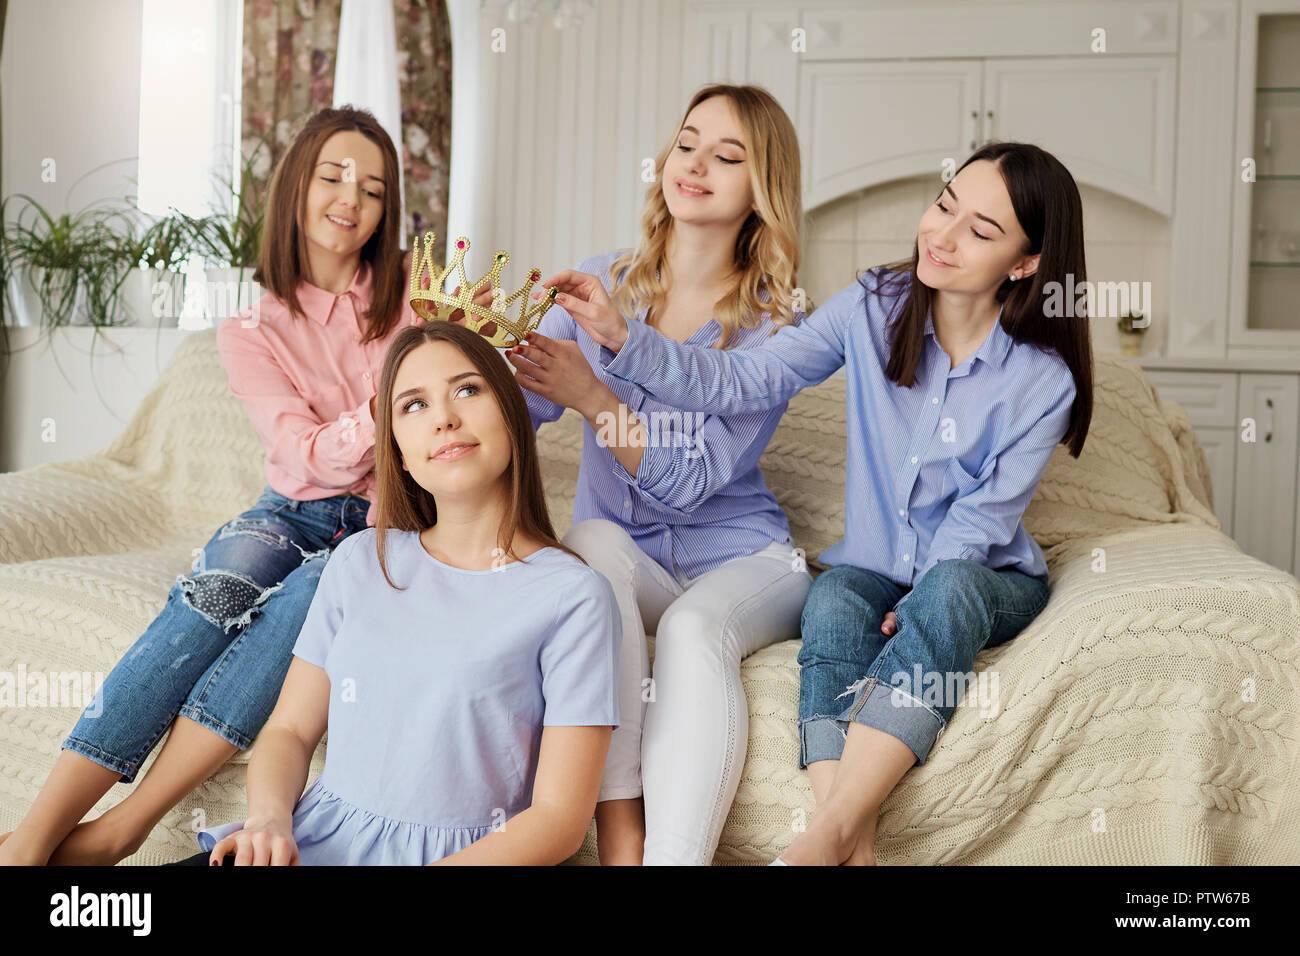 Girlfriends meeting friends talking in the room.  Stock Photo